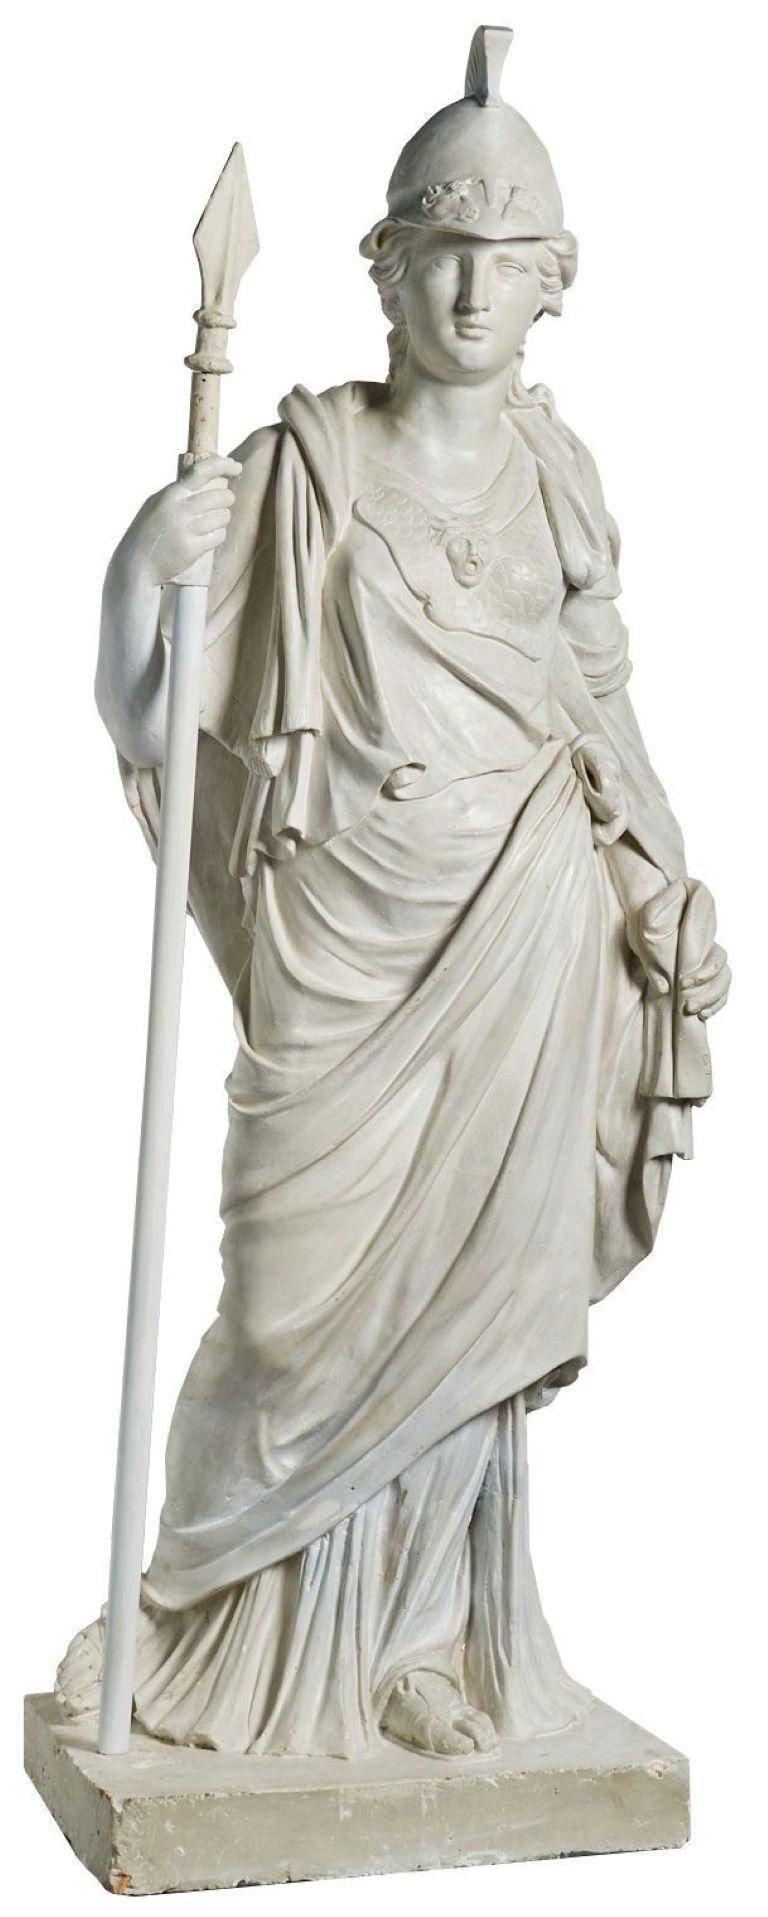 Antique Life Size Statue of Minerva. A painted, plaster figure of Minerva, after John Cheere. John Cheere was an English sculptor, born in London and was the brother of the sculptor Sir Henry Cheere. This model of Minerva was produced in lead by